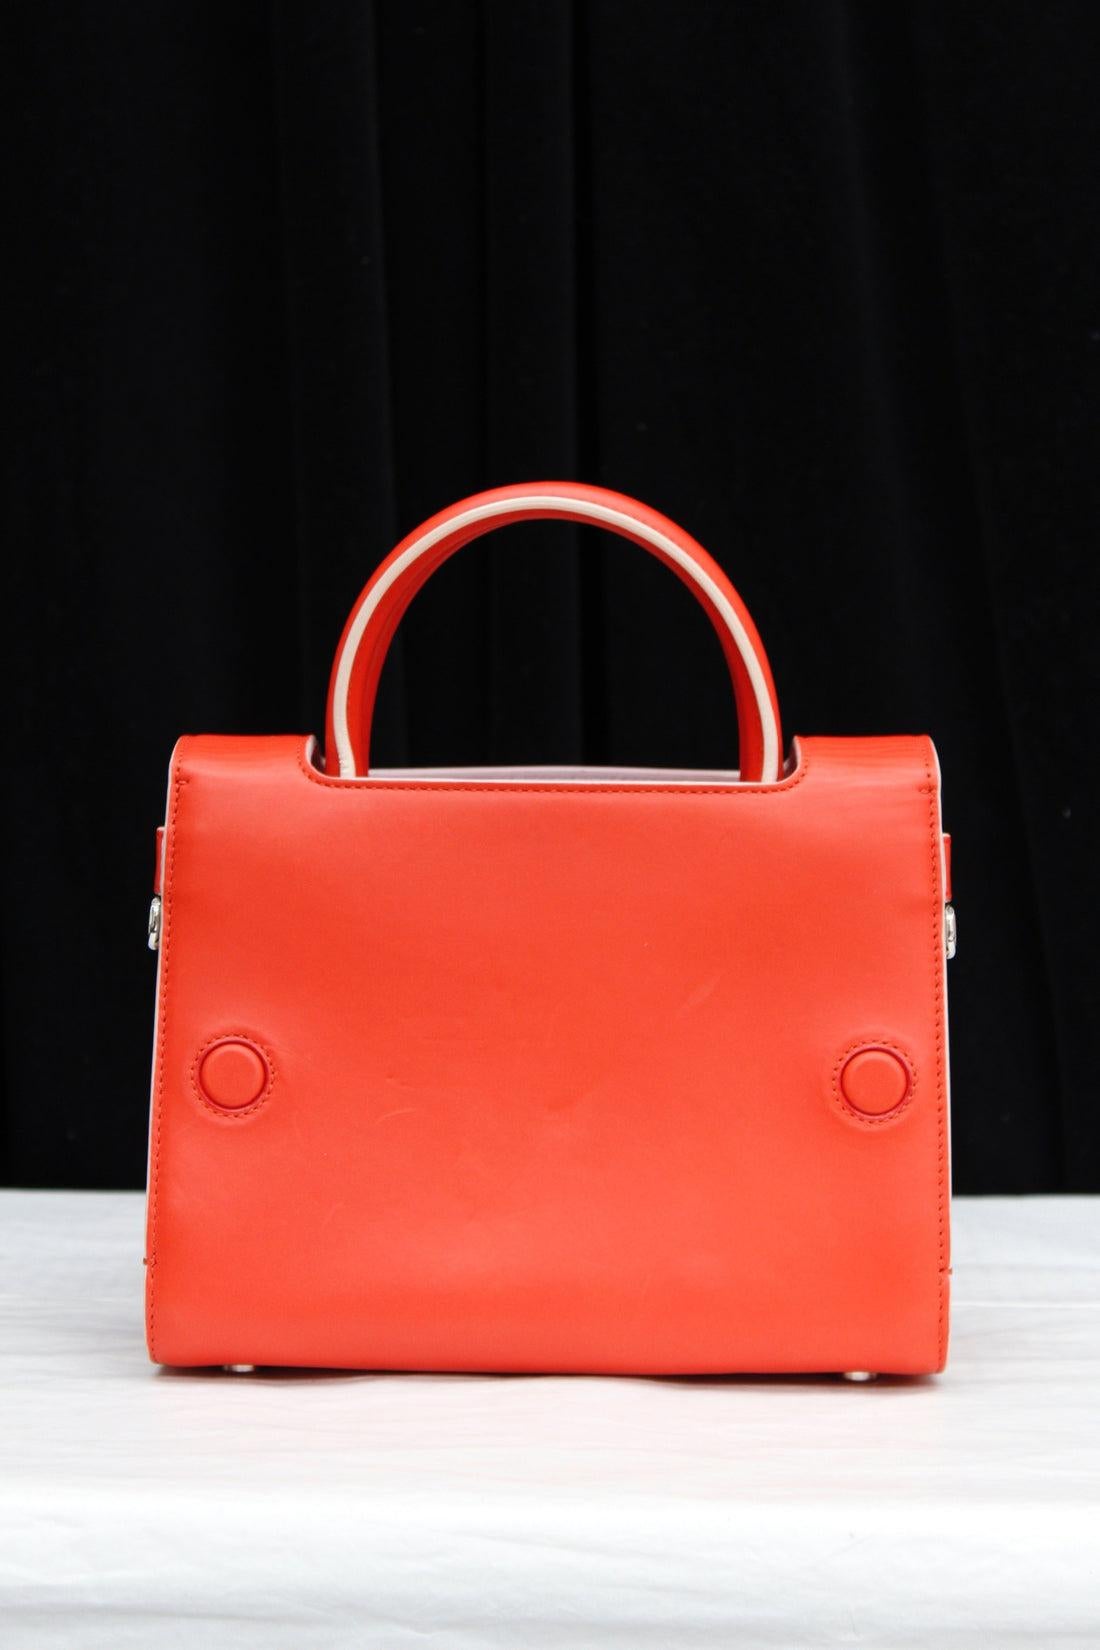 Women's Dior Modern Leather Bag in Orange and White Leather